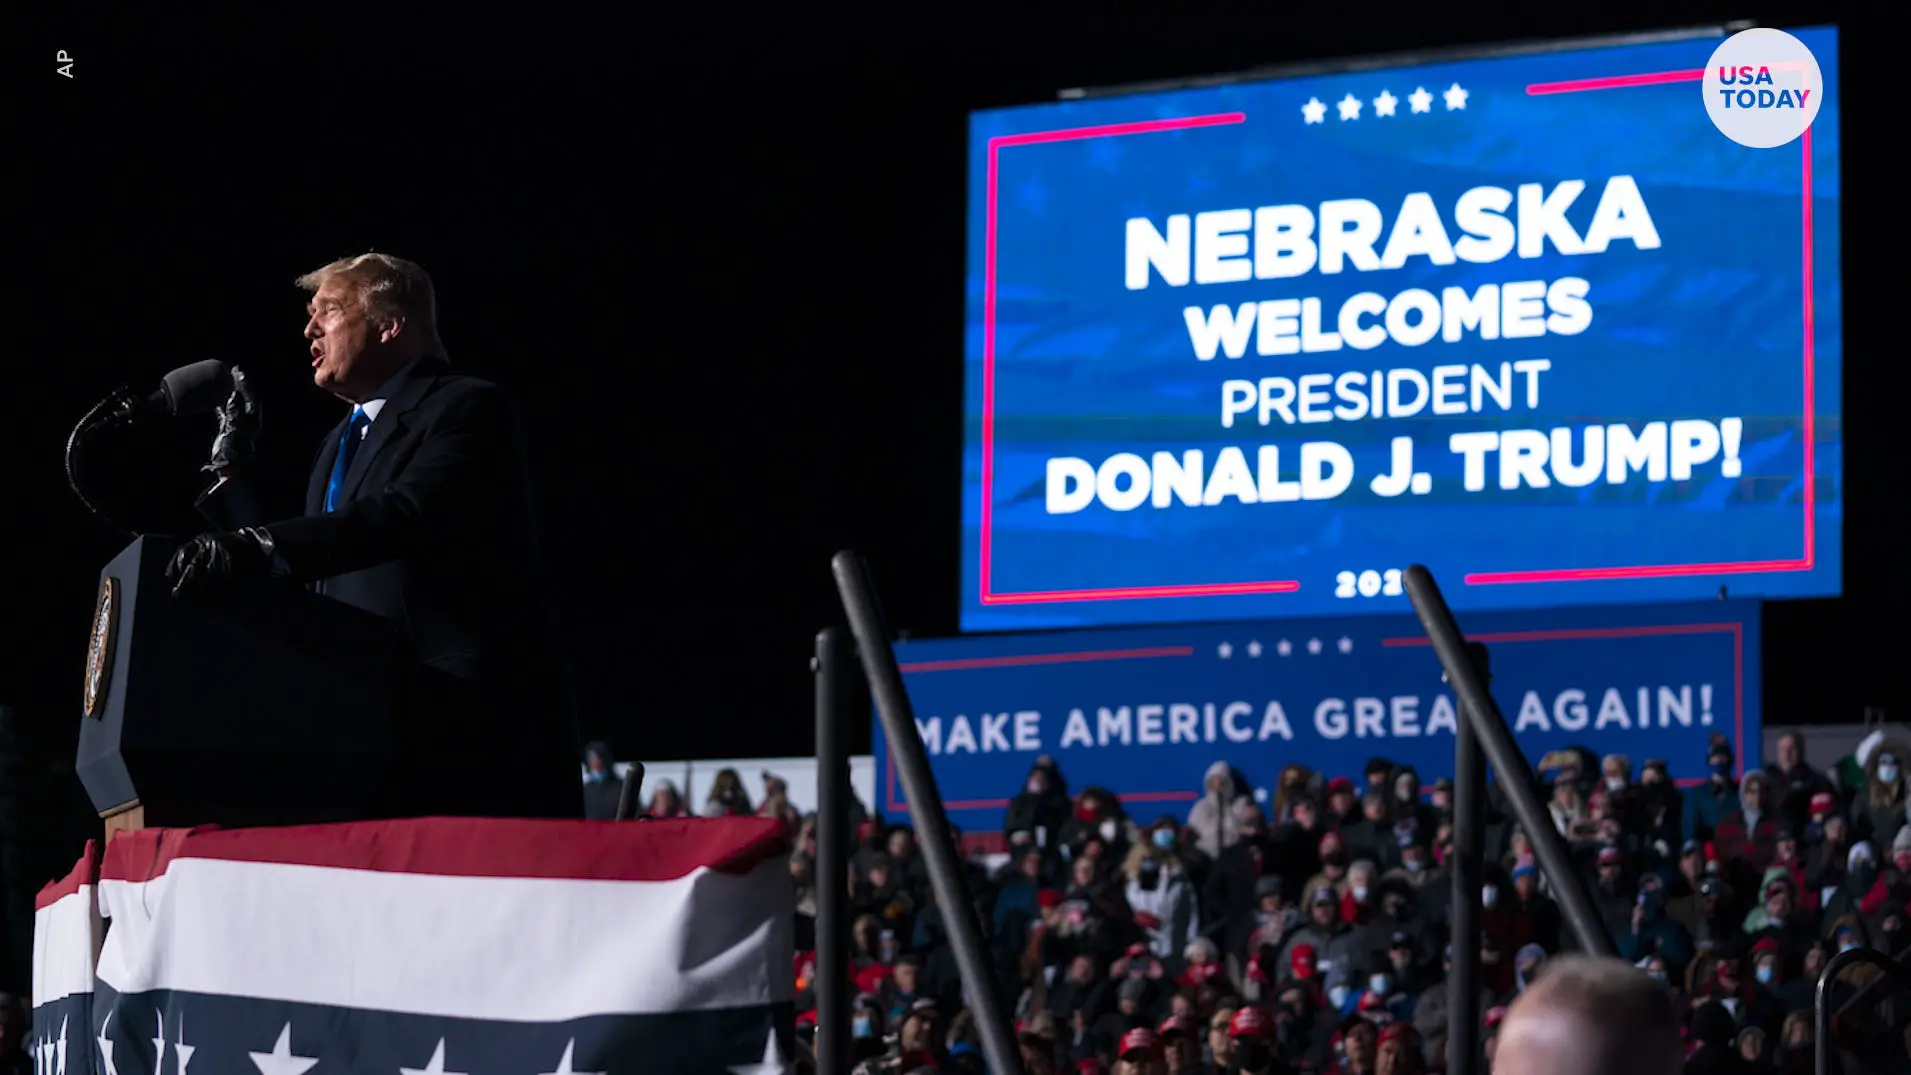 Trump rally attendees left in freezing cold after Nebraska ...